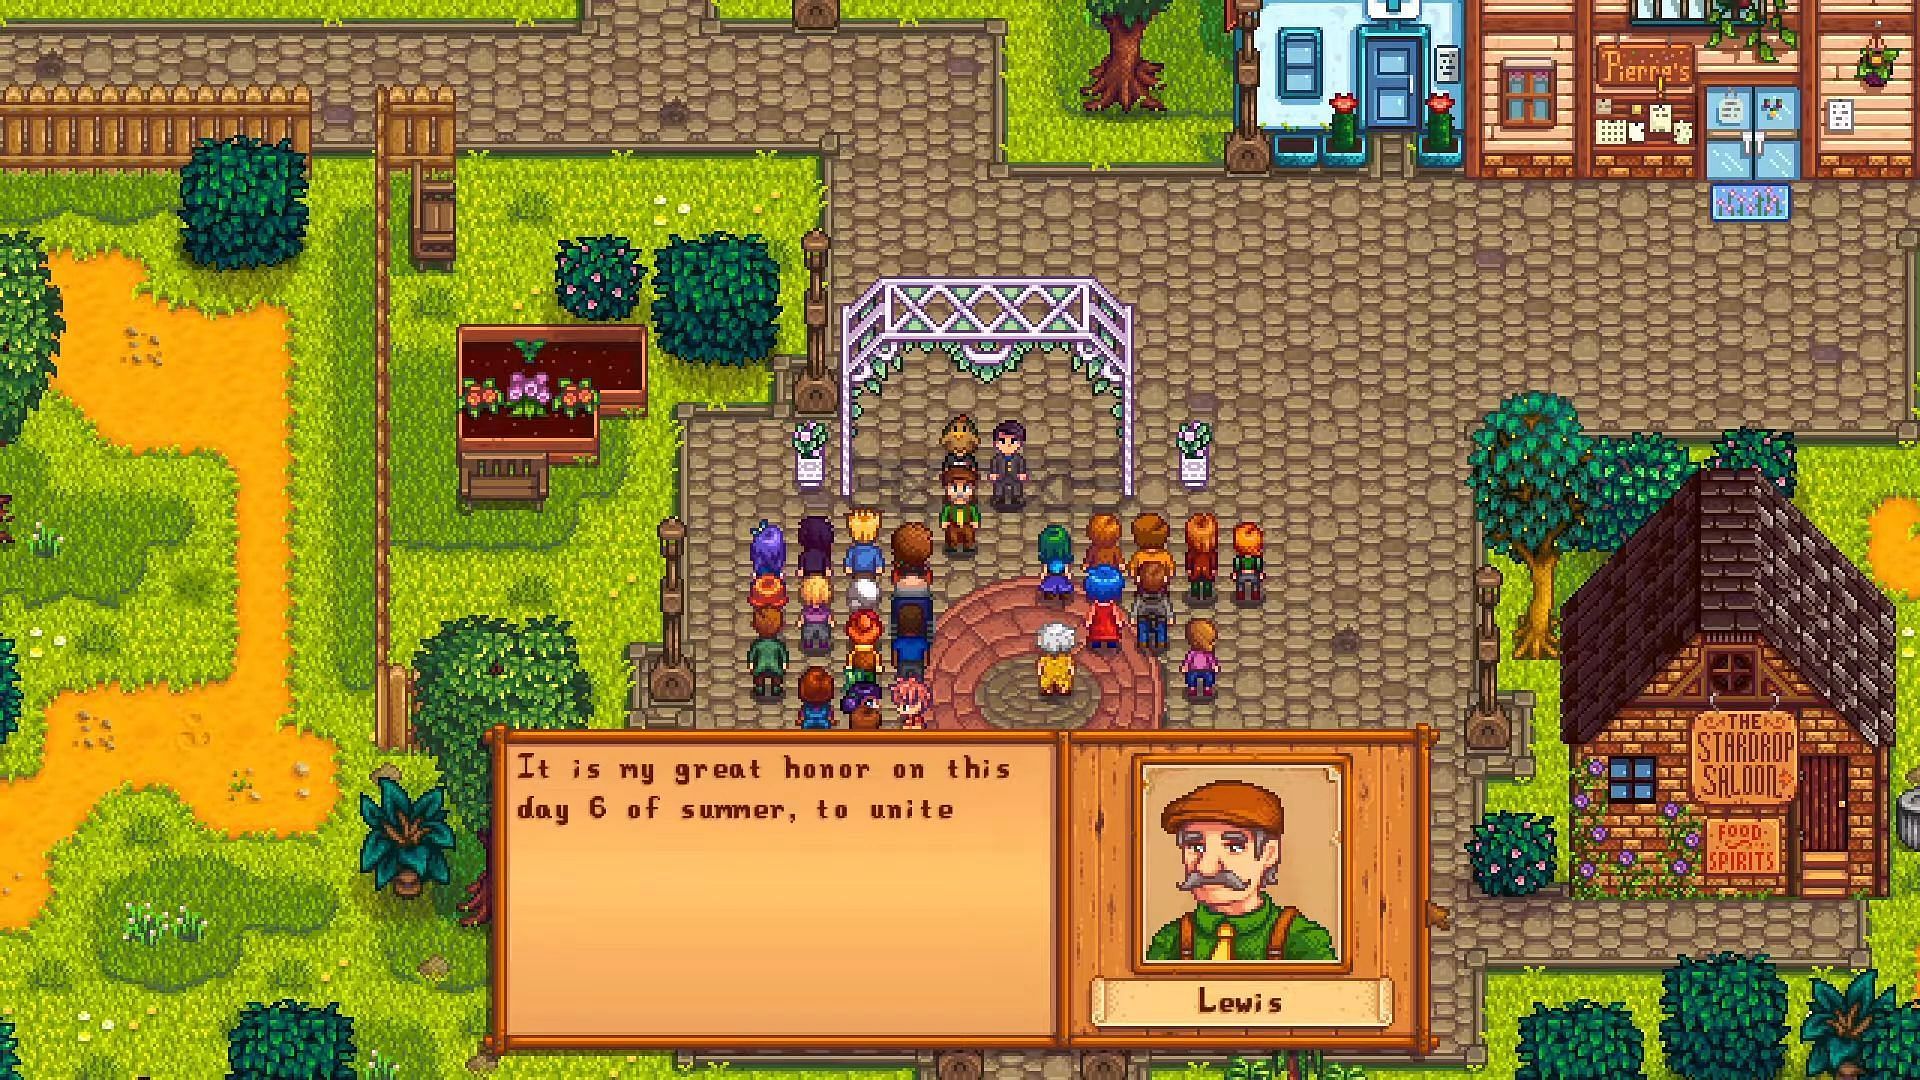 Completing heart events allows you to marry Shane (Image via ConcernedApe || YouTube @Bekavon)